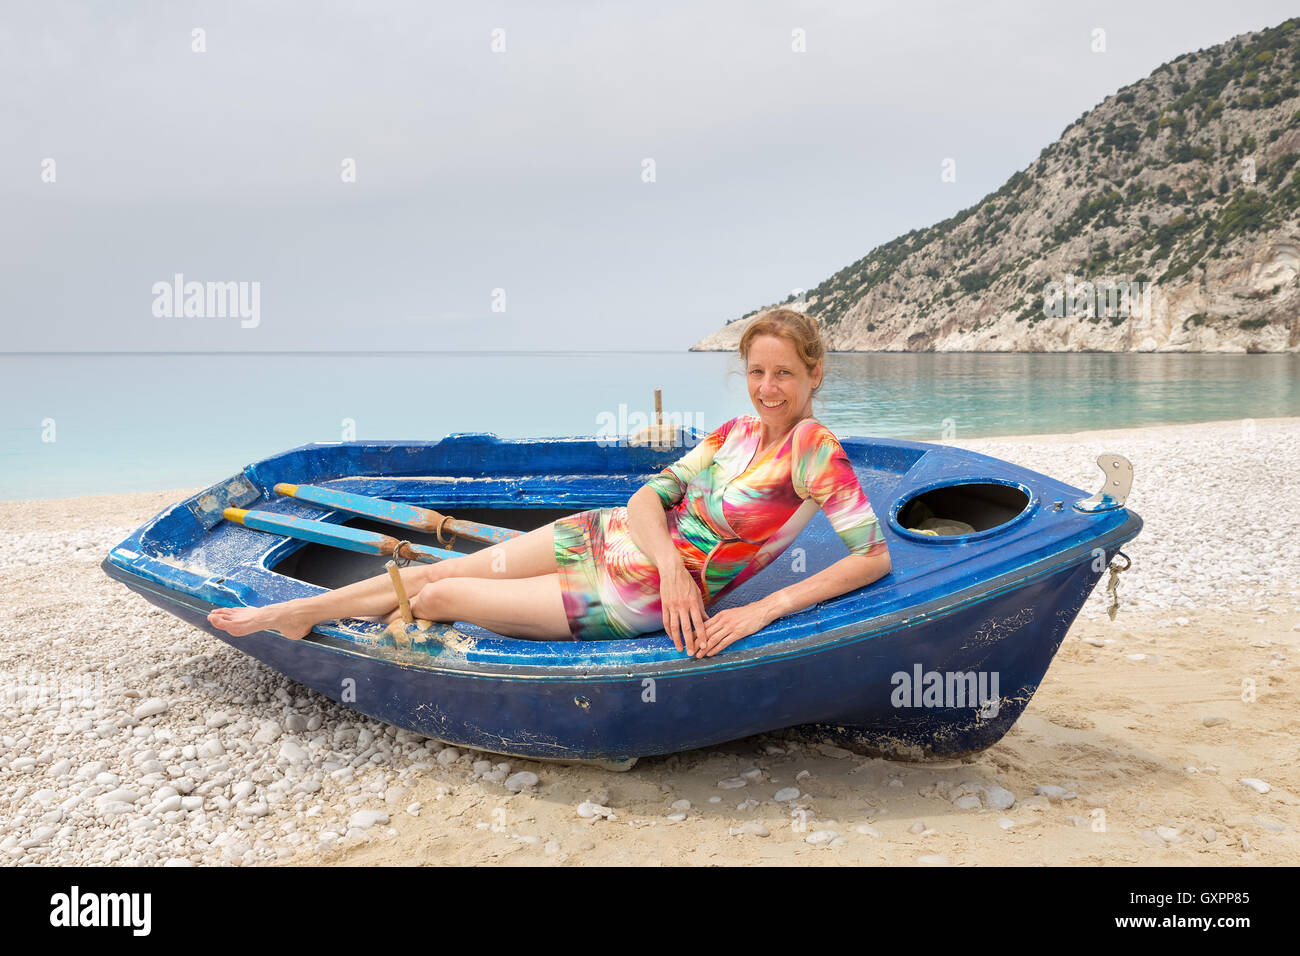 Dutch woman lying in rowing boat on greek beach with mountain and sea Stock Photo